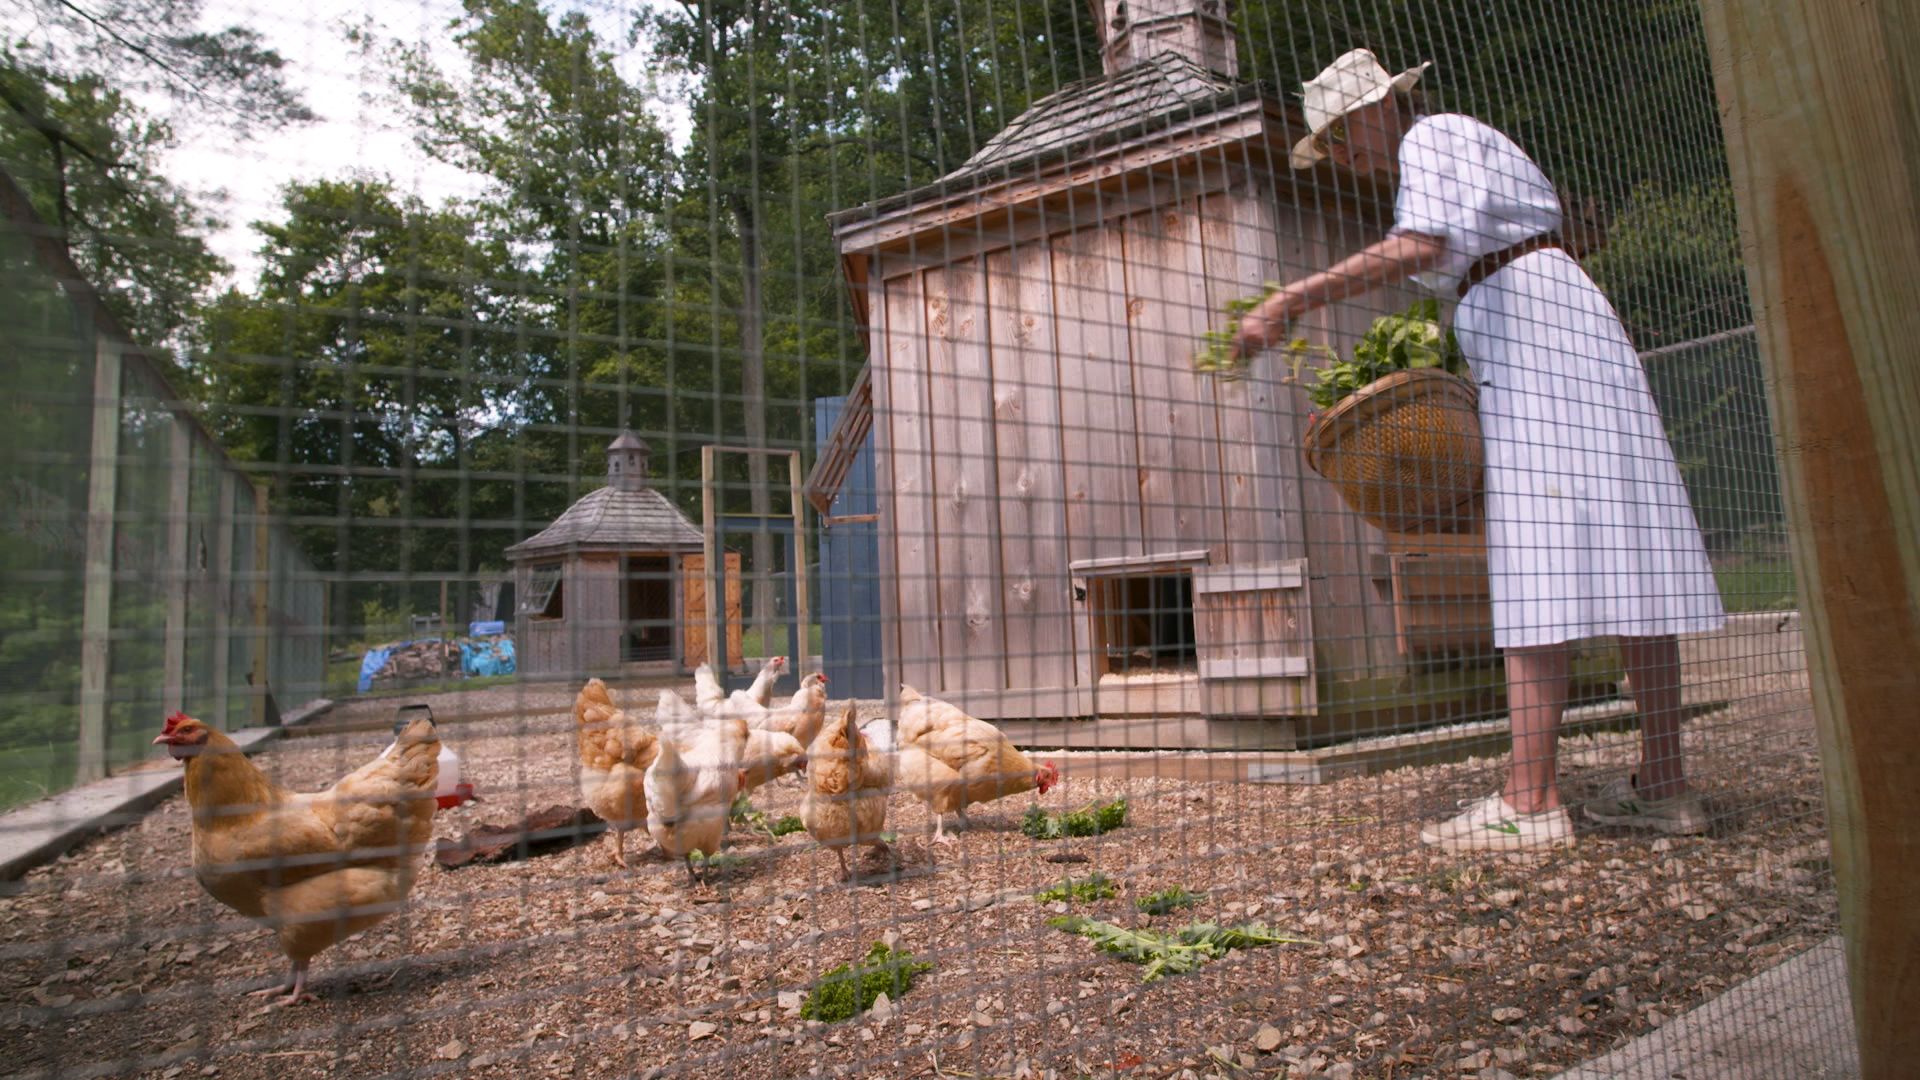 A woman in a white dress feeding chickens in a cage